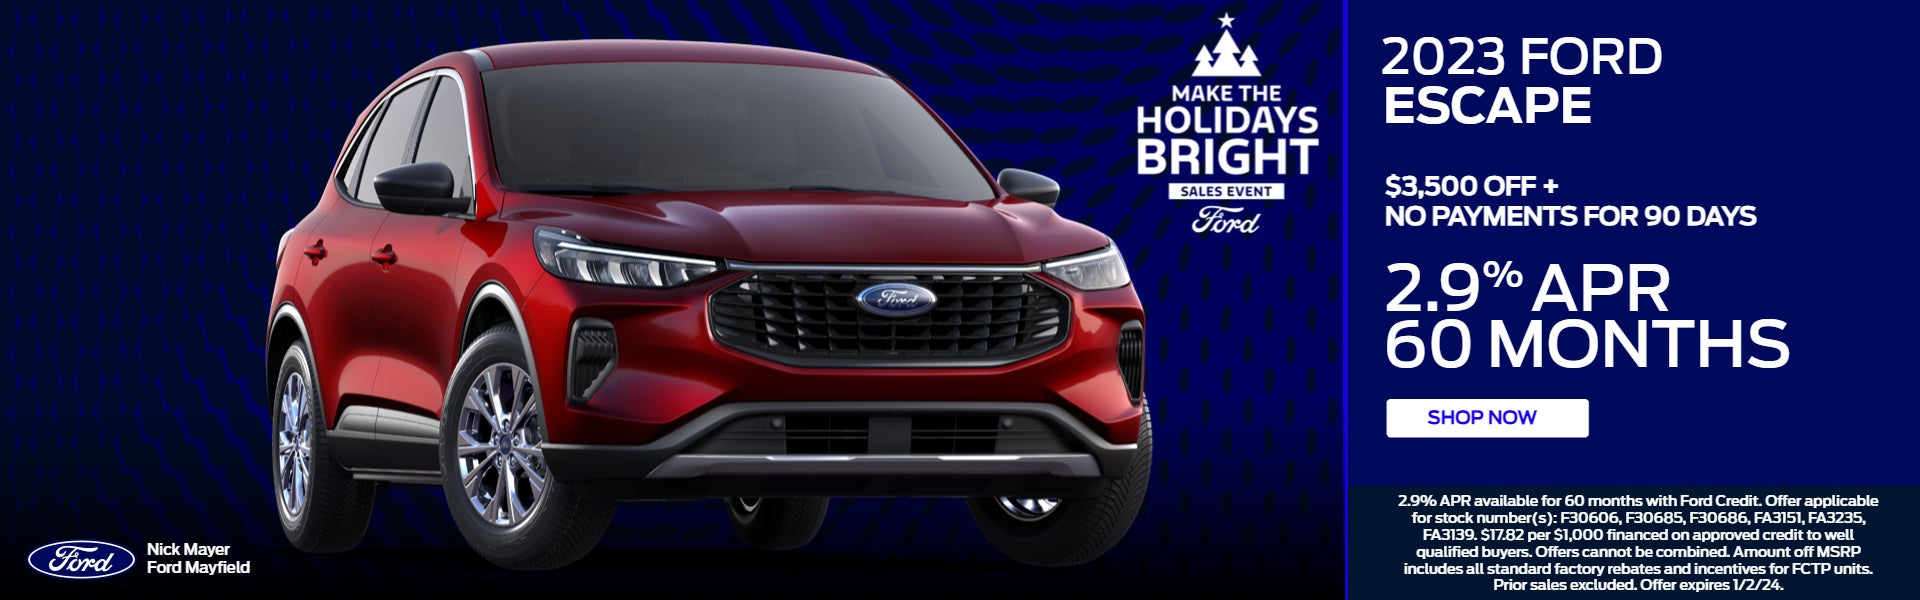 2023 Ford Escape 2.9% for 60 months